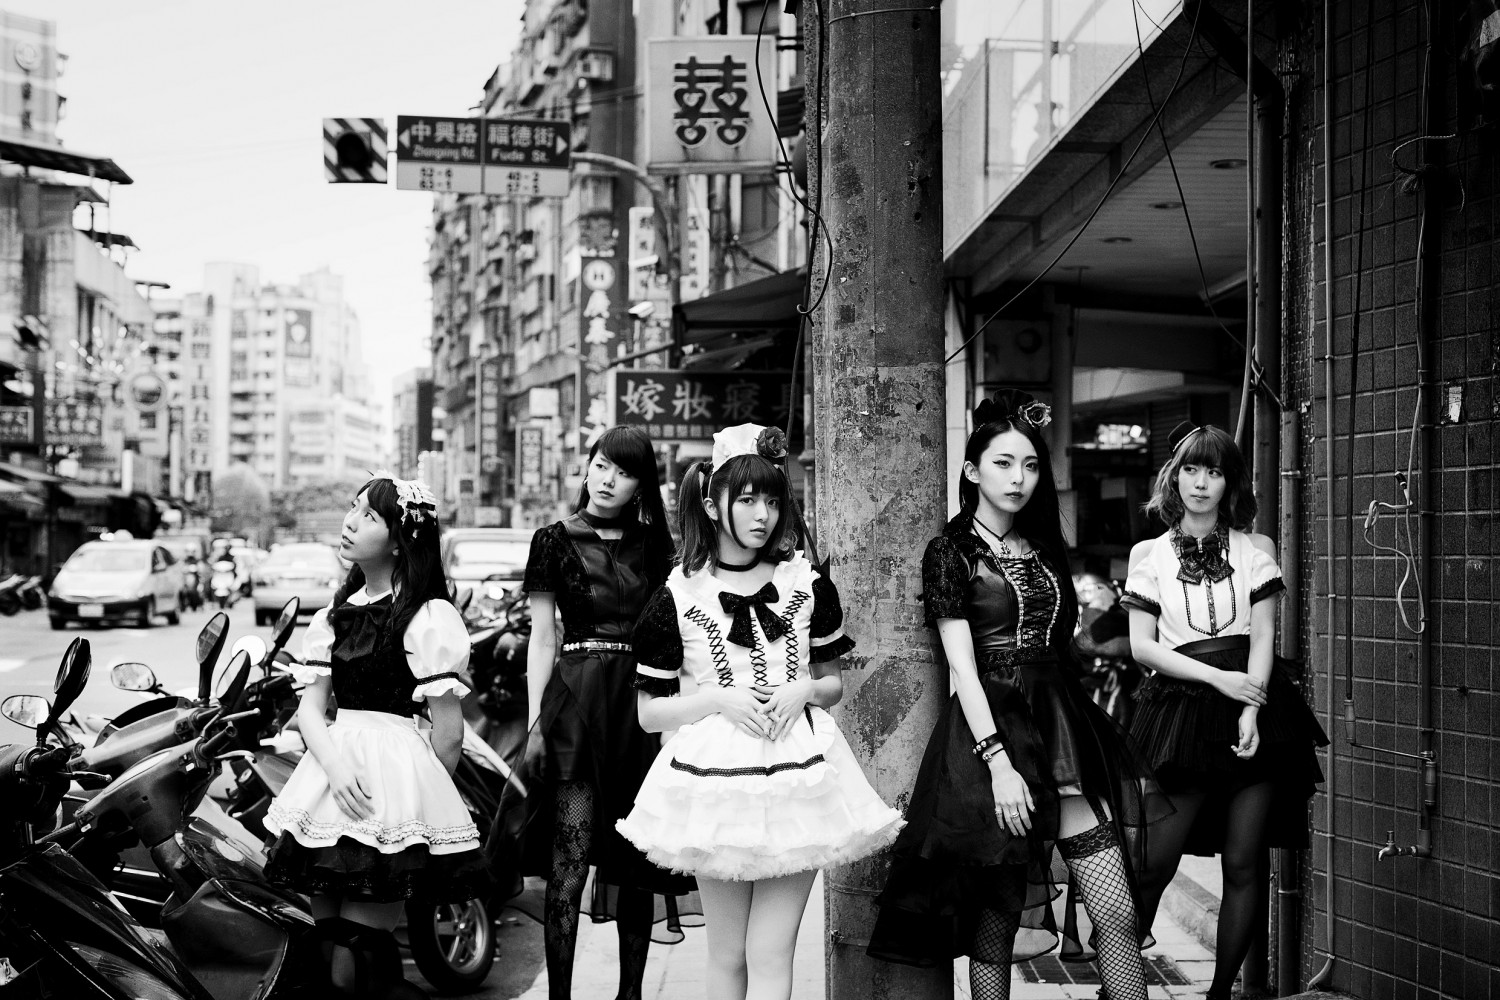 BAND-MAID Announce European Tour Dates and Release MV for “Choose me”!